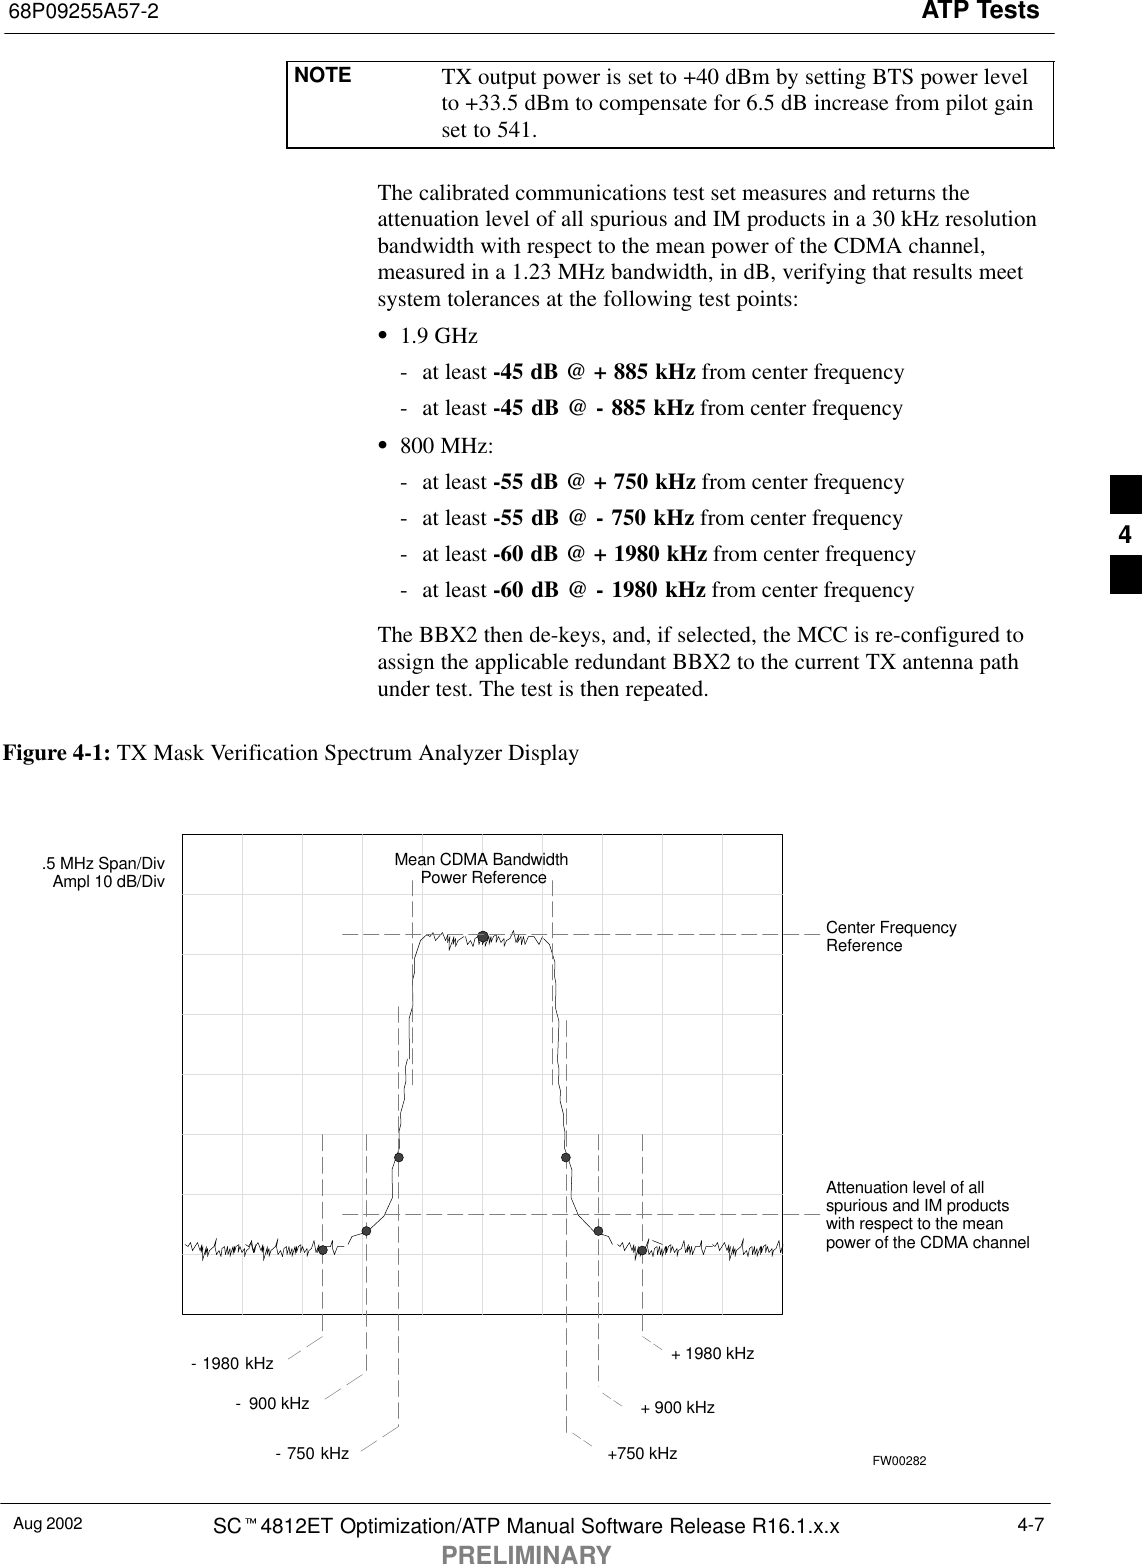 ATP Tests68P09255A57-2Aug 2002 SCt4812ET Optimization/ATP Manual Software Release R16.1.x.xPRELIMINARY4-7NOTE TX output power is set to +40 dBm by setting BTS power levelto +33.5 dBm to compensate for 6.5 dB increase from pilot gainset to 541.The calibrated communications test set measures and returns theattenuation level of all spurious and IM products in a 30 kHz resolutionbandwidth with respect to the mean power of the CDMA channel,measured in a 1.23 MHz bandwidth, in dB, verifying that results meetsystem tolerances at the following test points:S1.9 GHz- at least -45 dB @ + 885 kHz from center frequency- at least -45 dB @ - 885 kHz from center frequencyS800 MHz:- at least -55 dB @ + 750 kHz from center frequency- at least -55 dB @ - 750 kHz from center frequency- at least -60 dB @ + 1980 kHz from center frequency- at least -60 dB @ - 1980 kHz from center frequencyThe BBX2 then de-keys, and, if selected, the MCC is re-configured toassign the applicable redundant BBX2 to the current TX antenna pathunder test. The test is then repeated.Figure 4-1: TX Mask Verification Spectrum Analyzer Display-  900 kHz + 900 kHzCenter FrequencyReferenceAttenuation level of allspurious and IM productswith respect to the meanpower of the CDMA channel.5 MHz Span/DivAmpl 10 dB/DivMean CDMA Bandwidth Power Reference+750 kHz+ 1980 kHz- 750 kHz- 1980 kHzFW002824